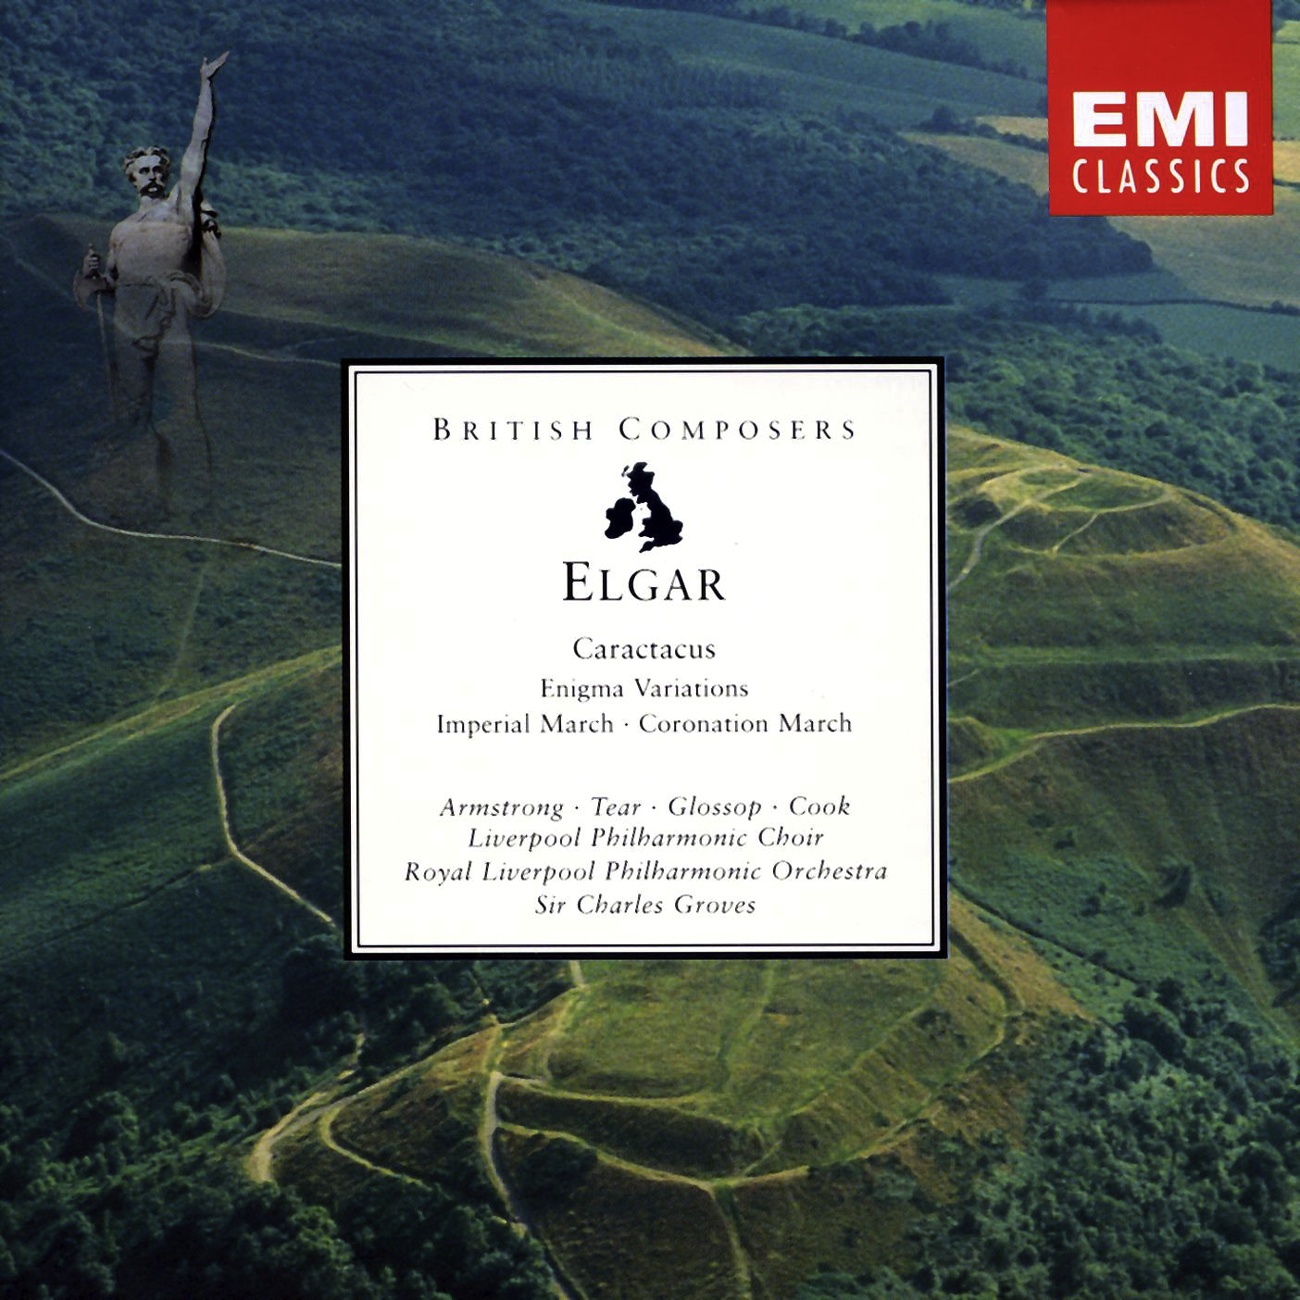 ELGAR: VARIATIONS ON AN ORIGINAL THEME ('ENIGMA')  OP.36: I. C.A.E. (THE COMPOSERS WIFE)